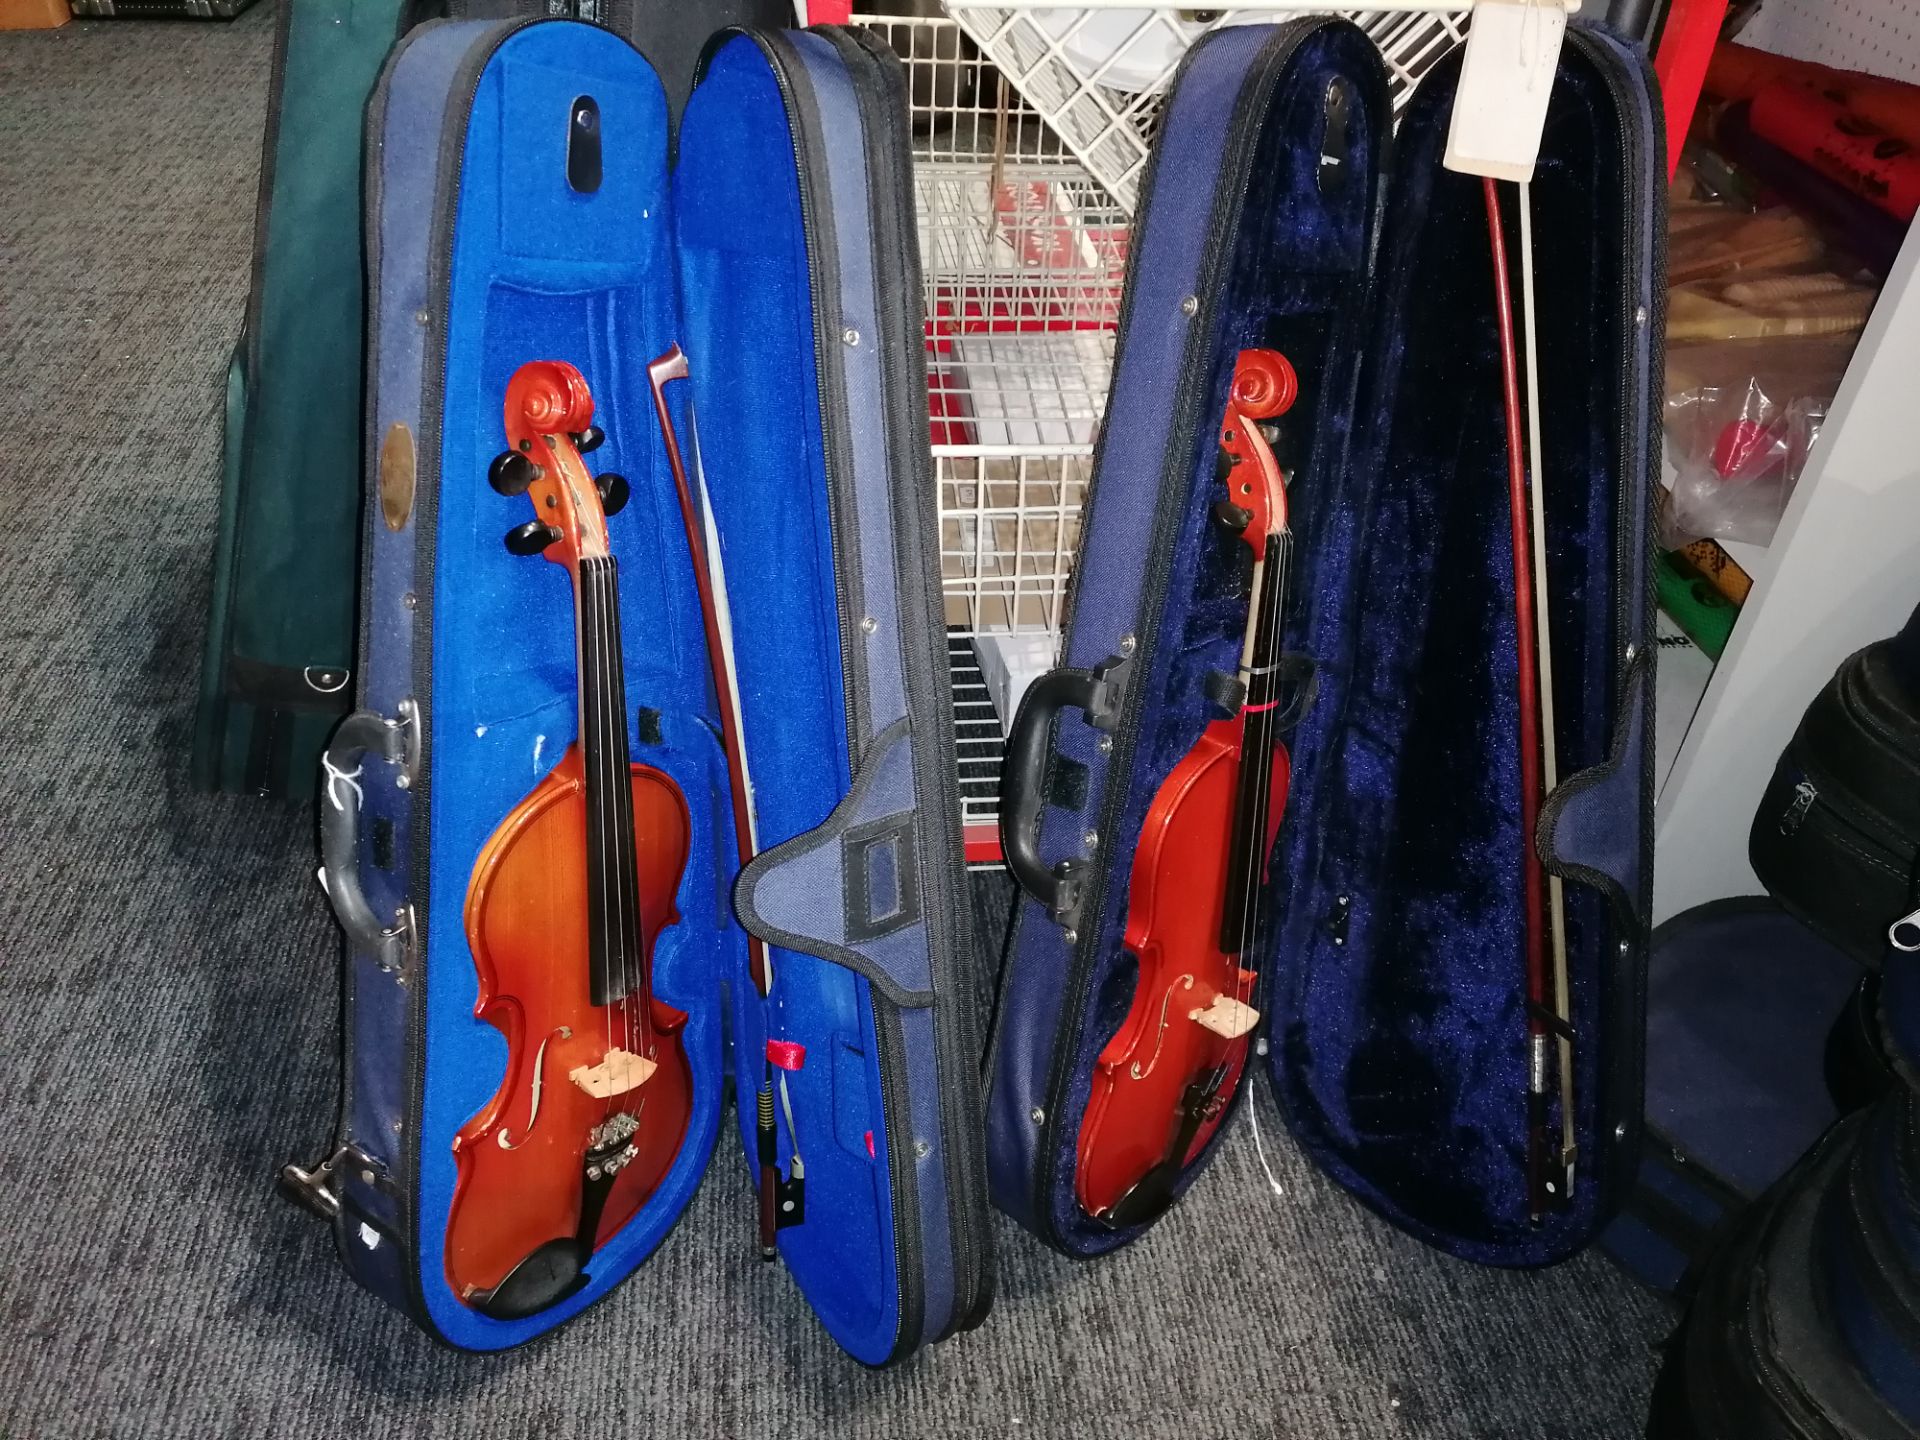 Various Used Violins With Cases (6) - Image 8 of 11